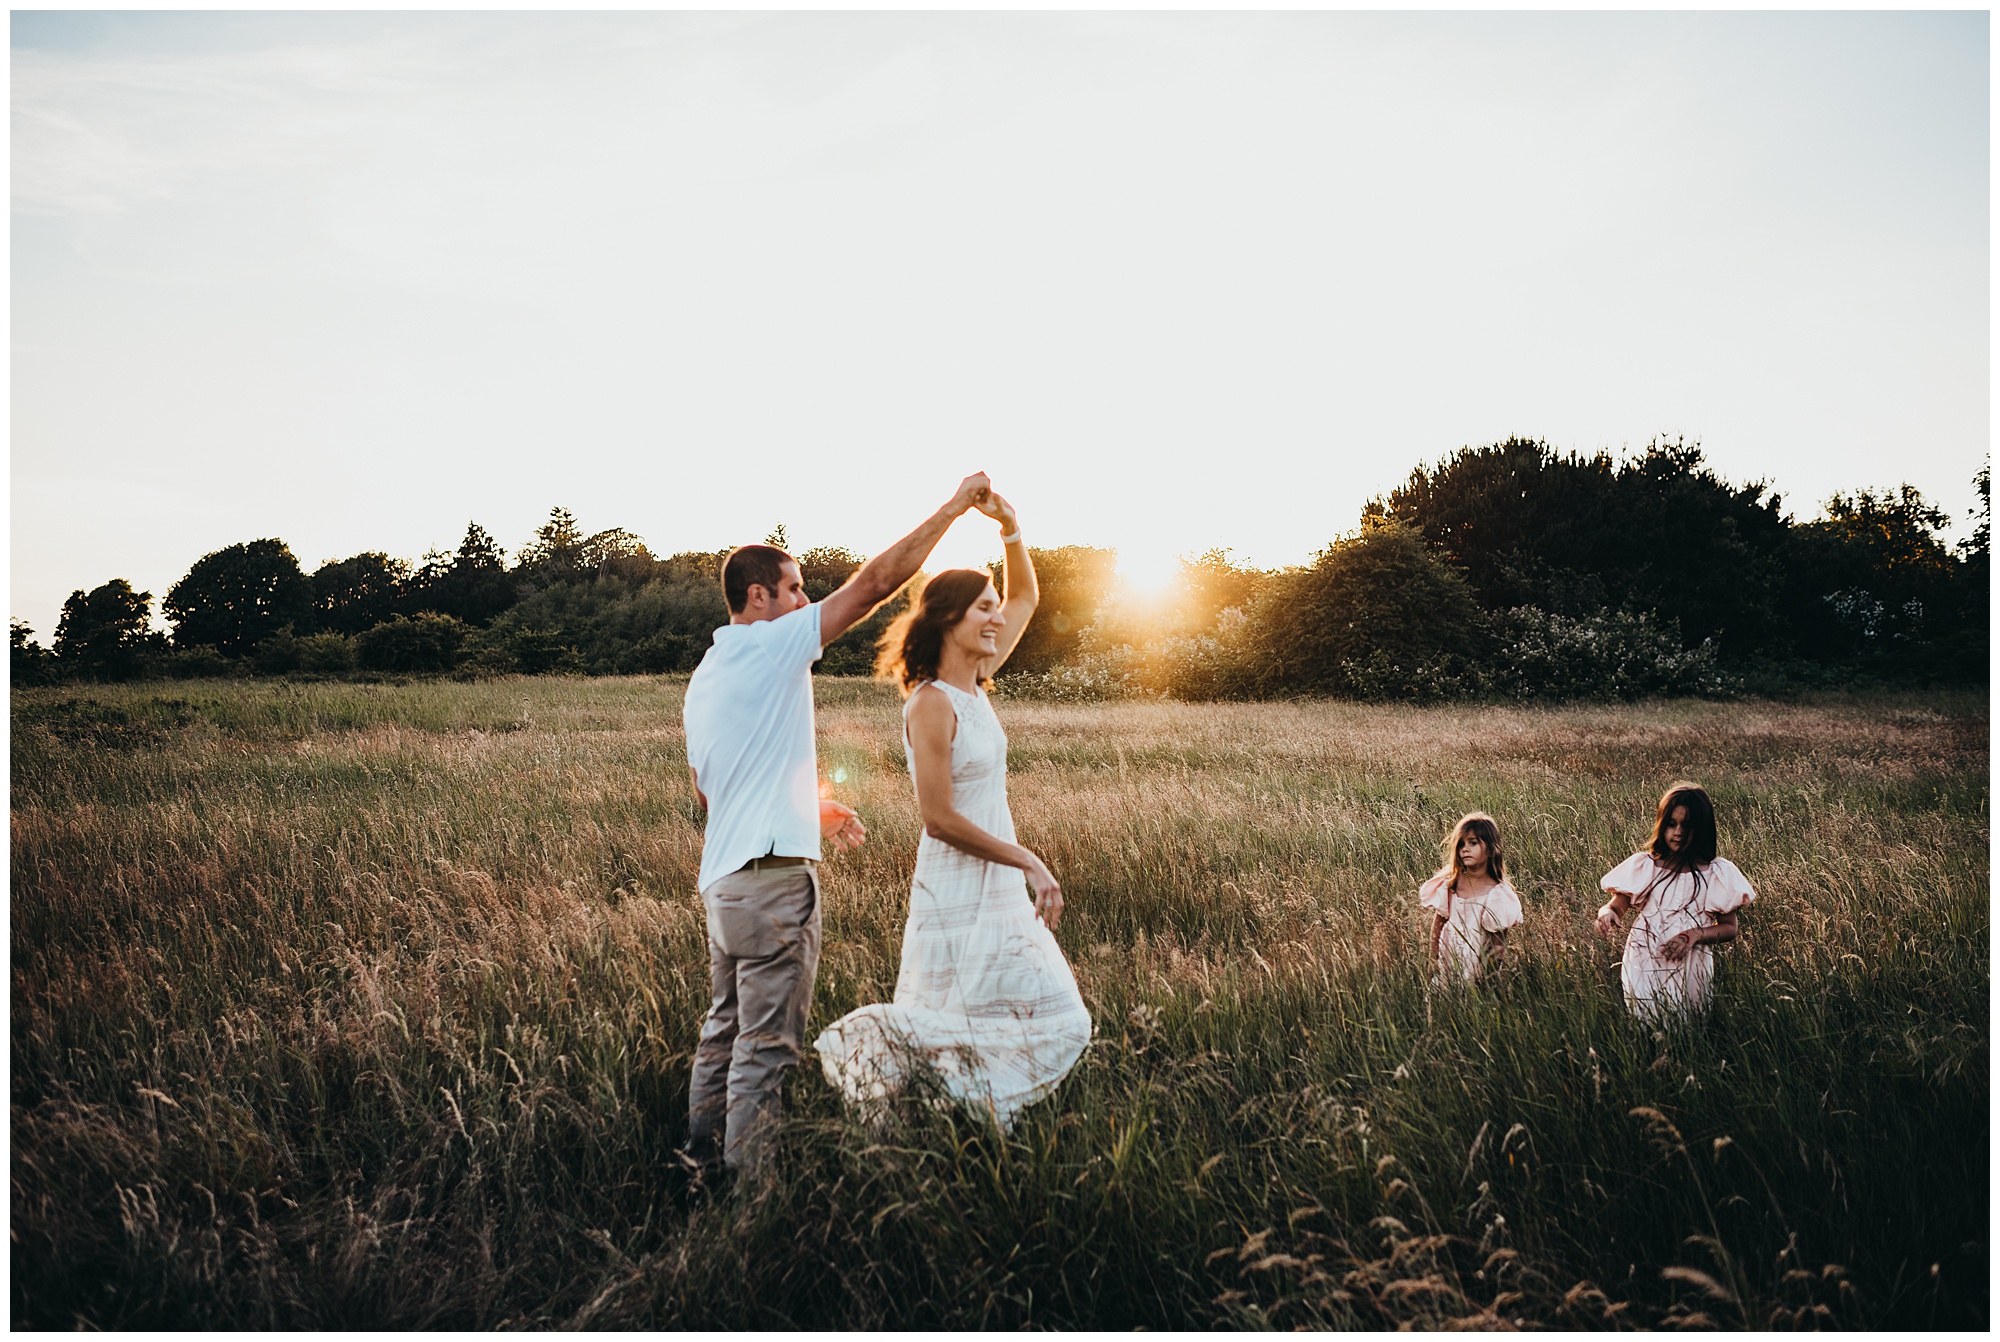 mom and dad dance while little girls watch in field at sunset Emily Ann Photography Seattle Family Photographer